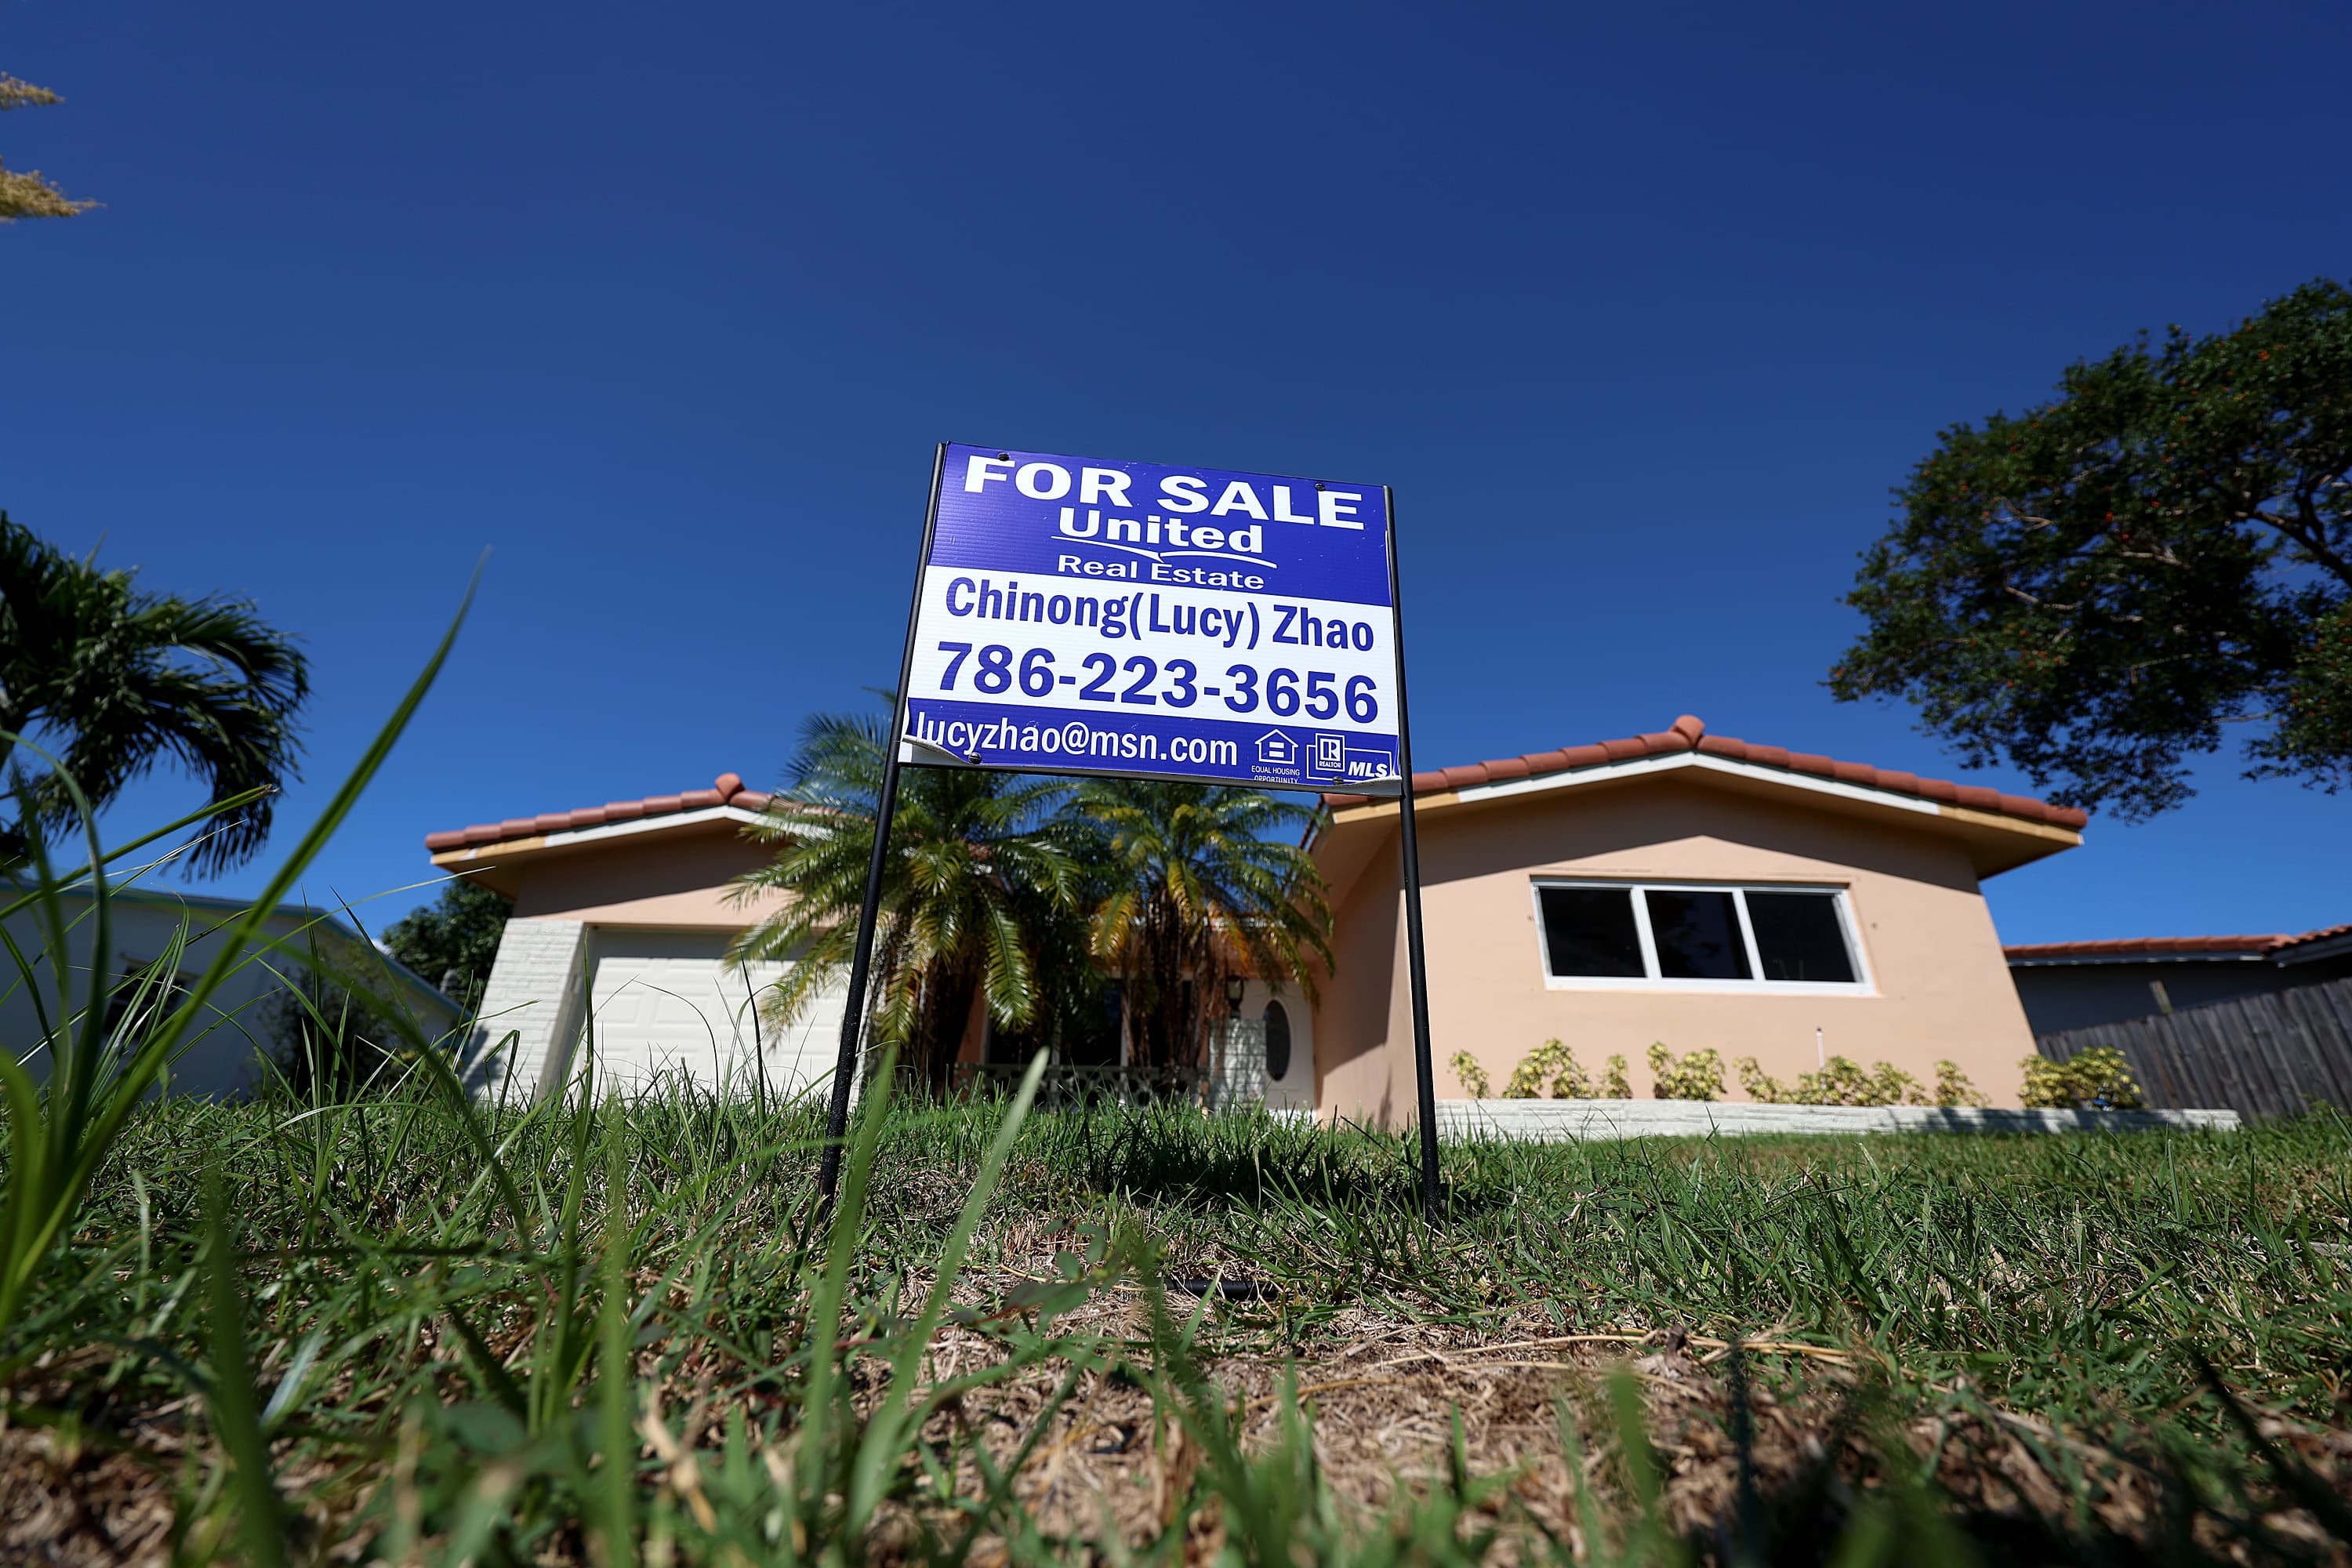 How Wall Street bought single-family homes and put them up for rent